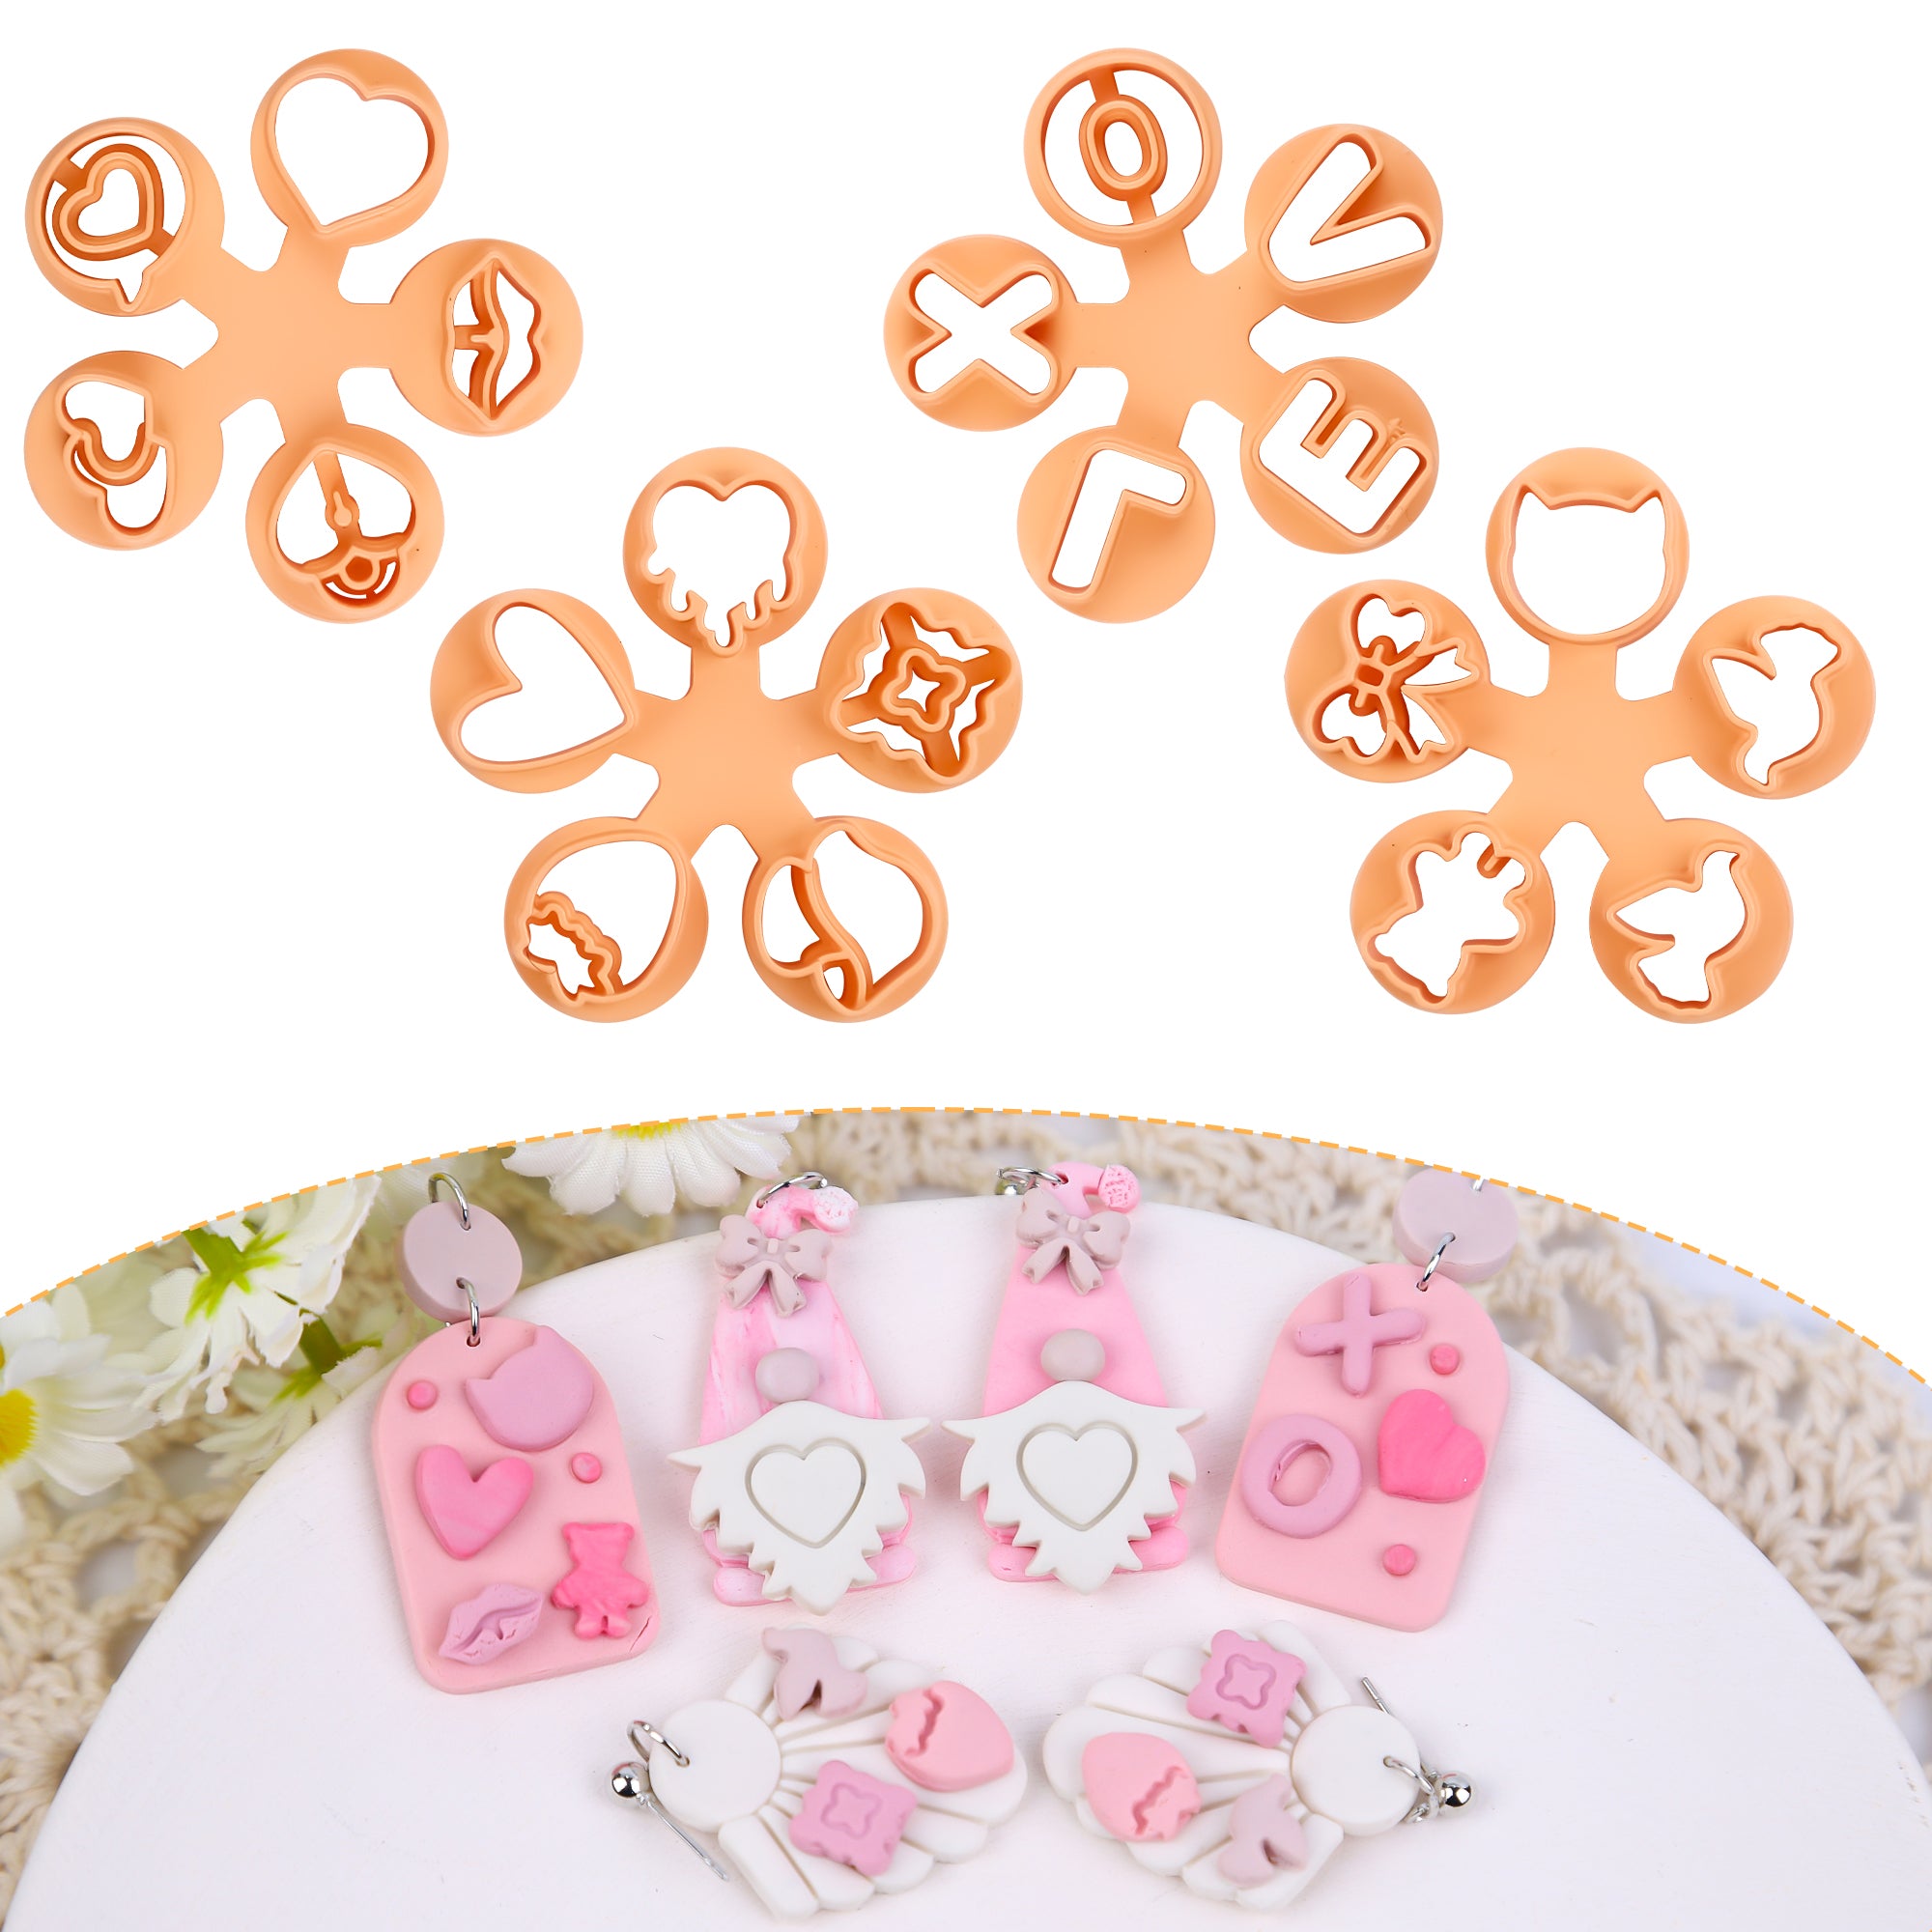 Puocaon Valentines Mini Clay Cutters